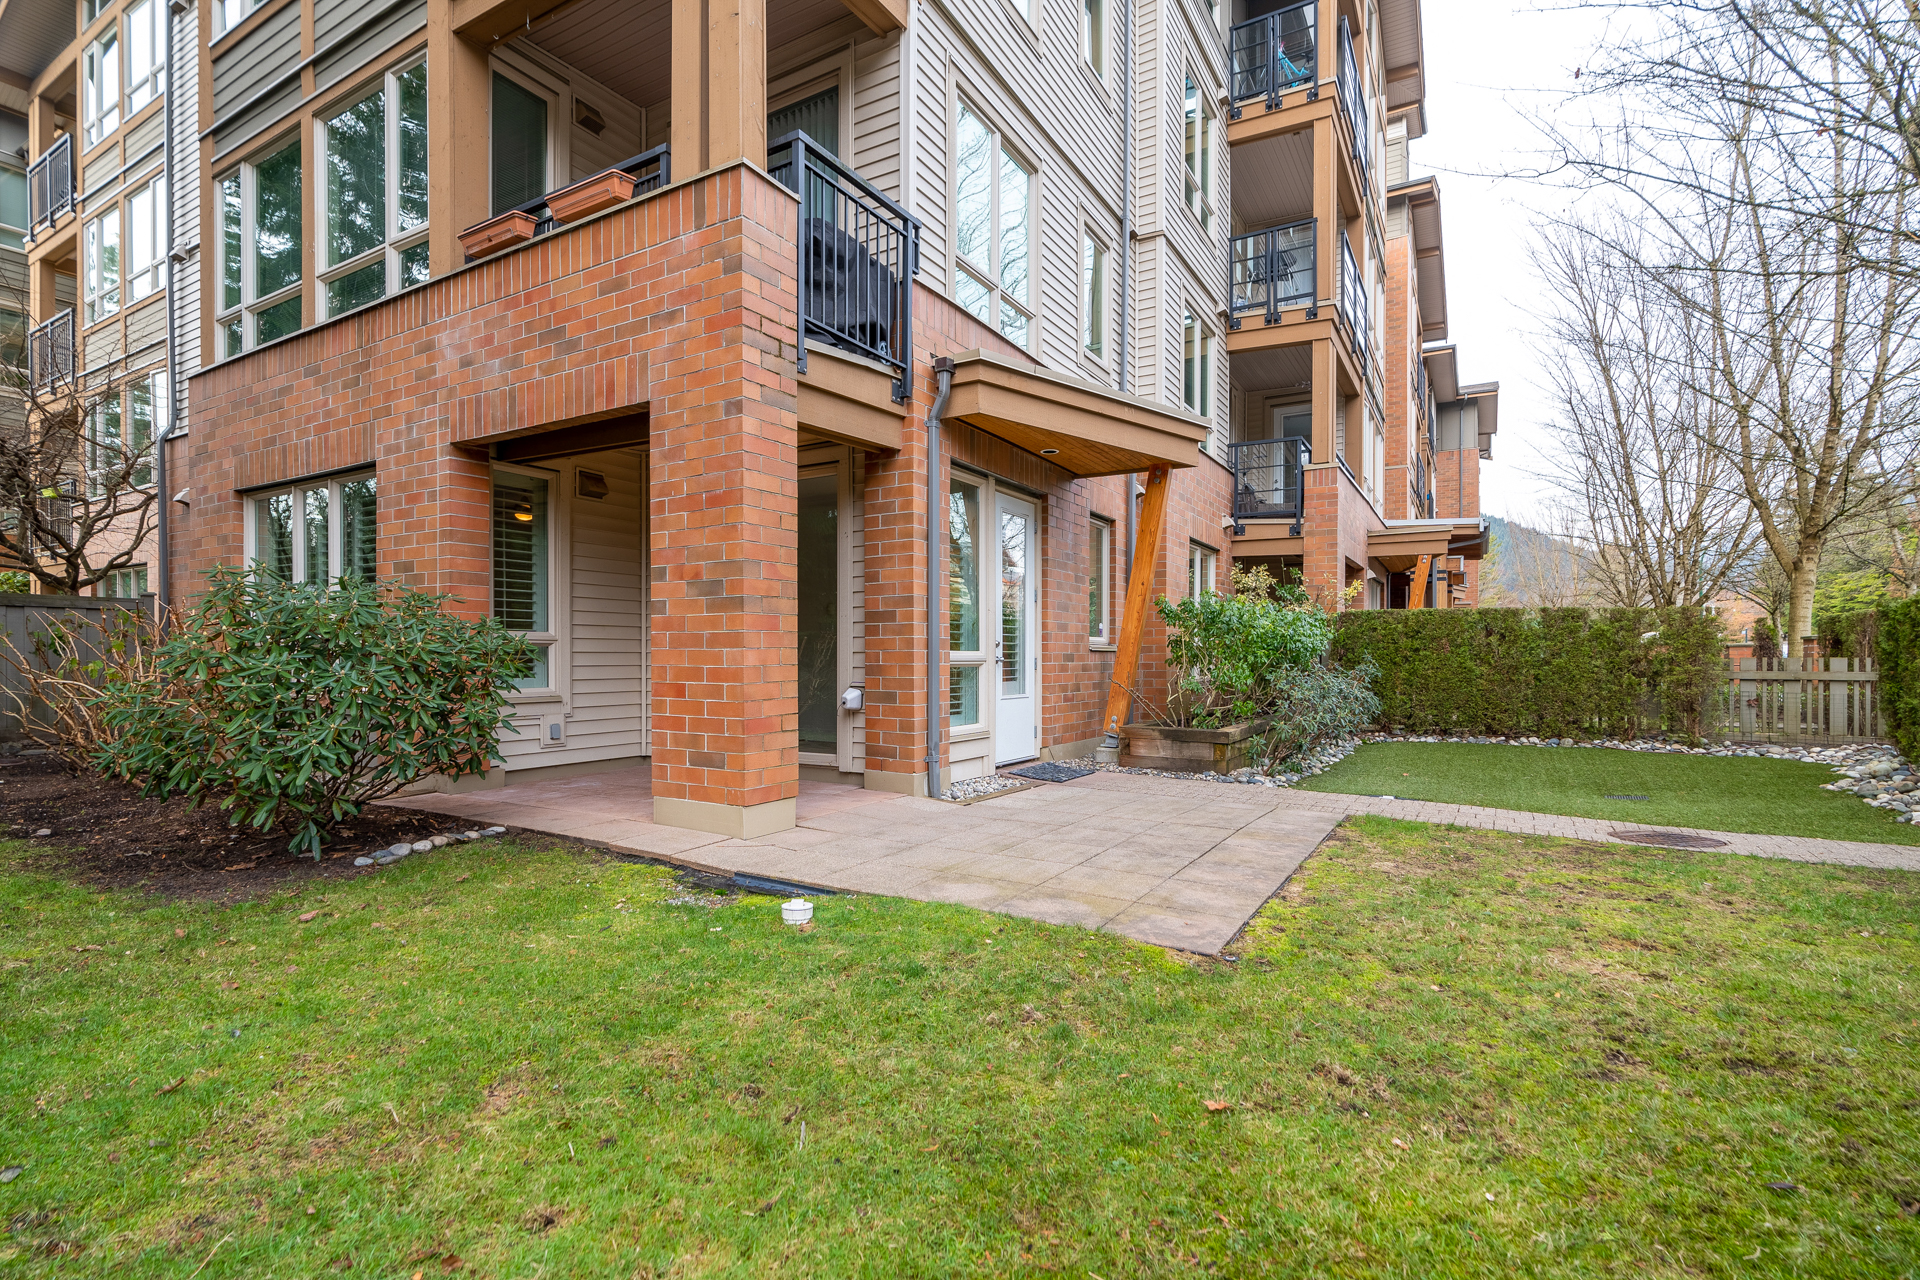 102 2601 Whietely Court, North Vancouver - For Sale - image 6